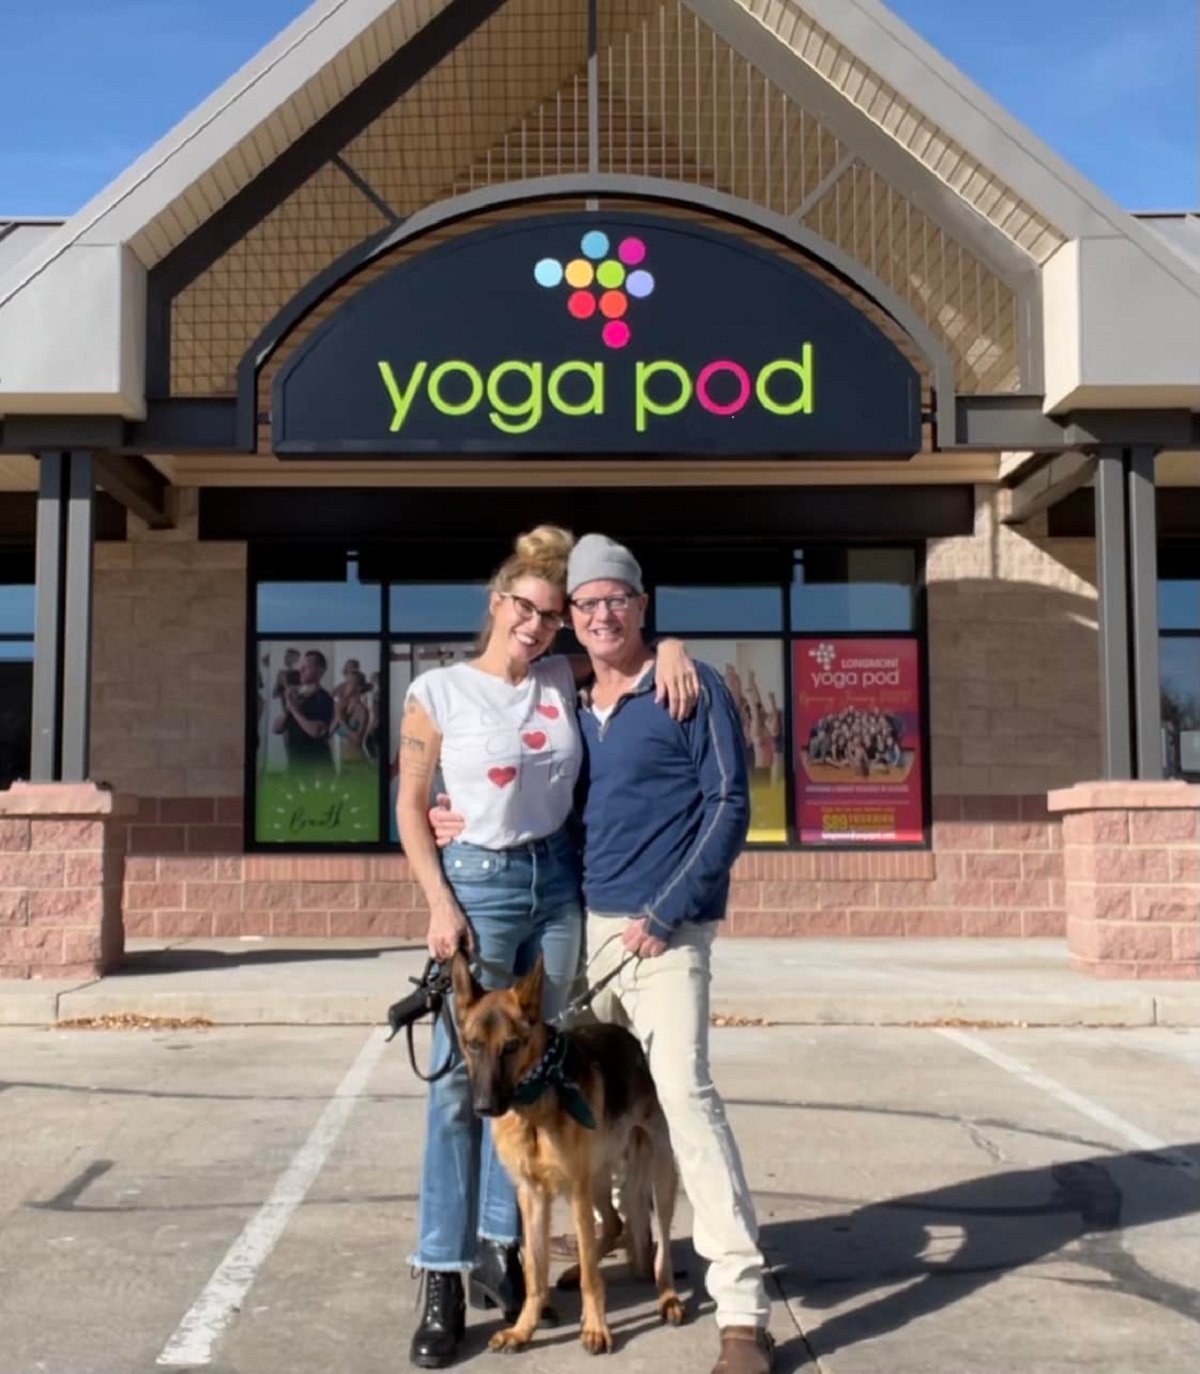 https://whatnowdenver.com/wp-content/uploads/sites/8/2021/12/Yoga-Pod-to-Open-in-Longmont-in-2022.jpg